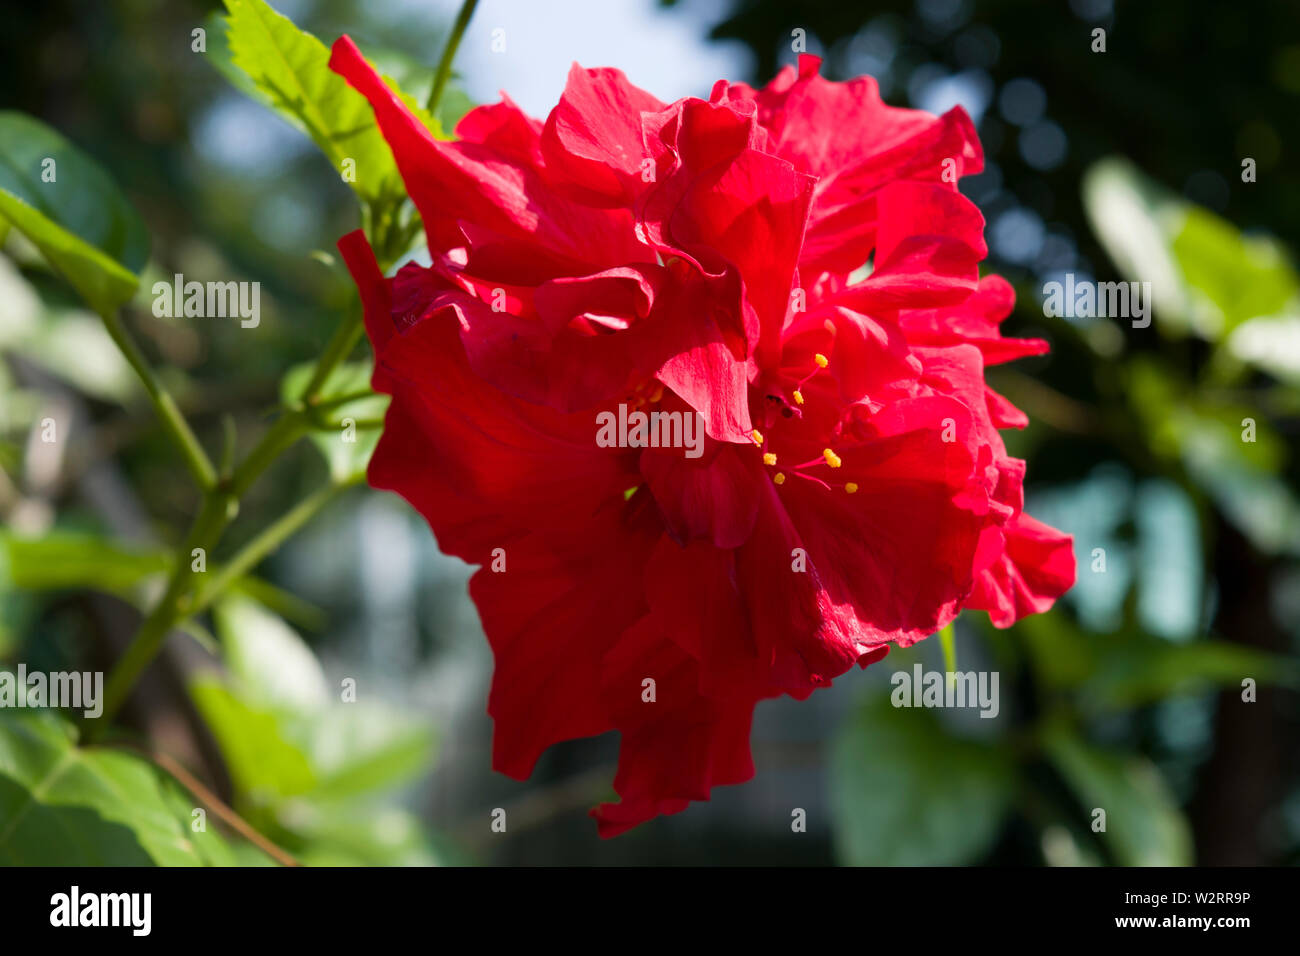 Beautiful ornamental flower in the summer time: Hibiscus rosa-sinensis, known as Chinese hibiscus, China rose, Hawaiian hibiscus, rose mallow. Stock Photo